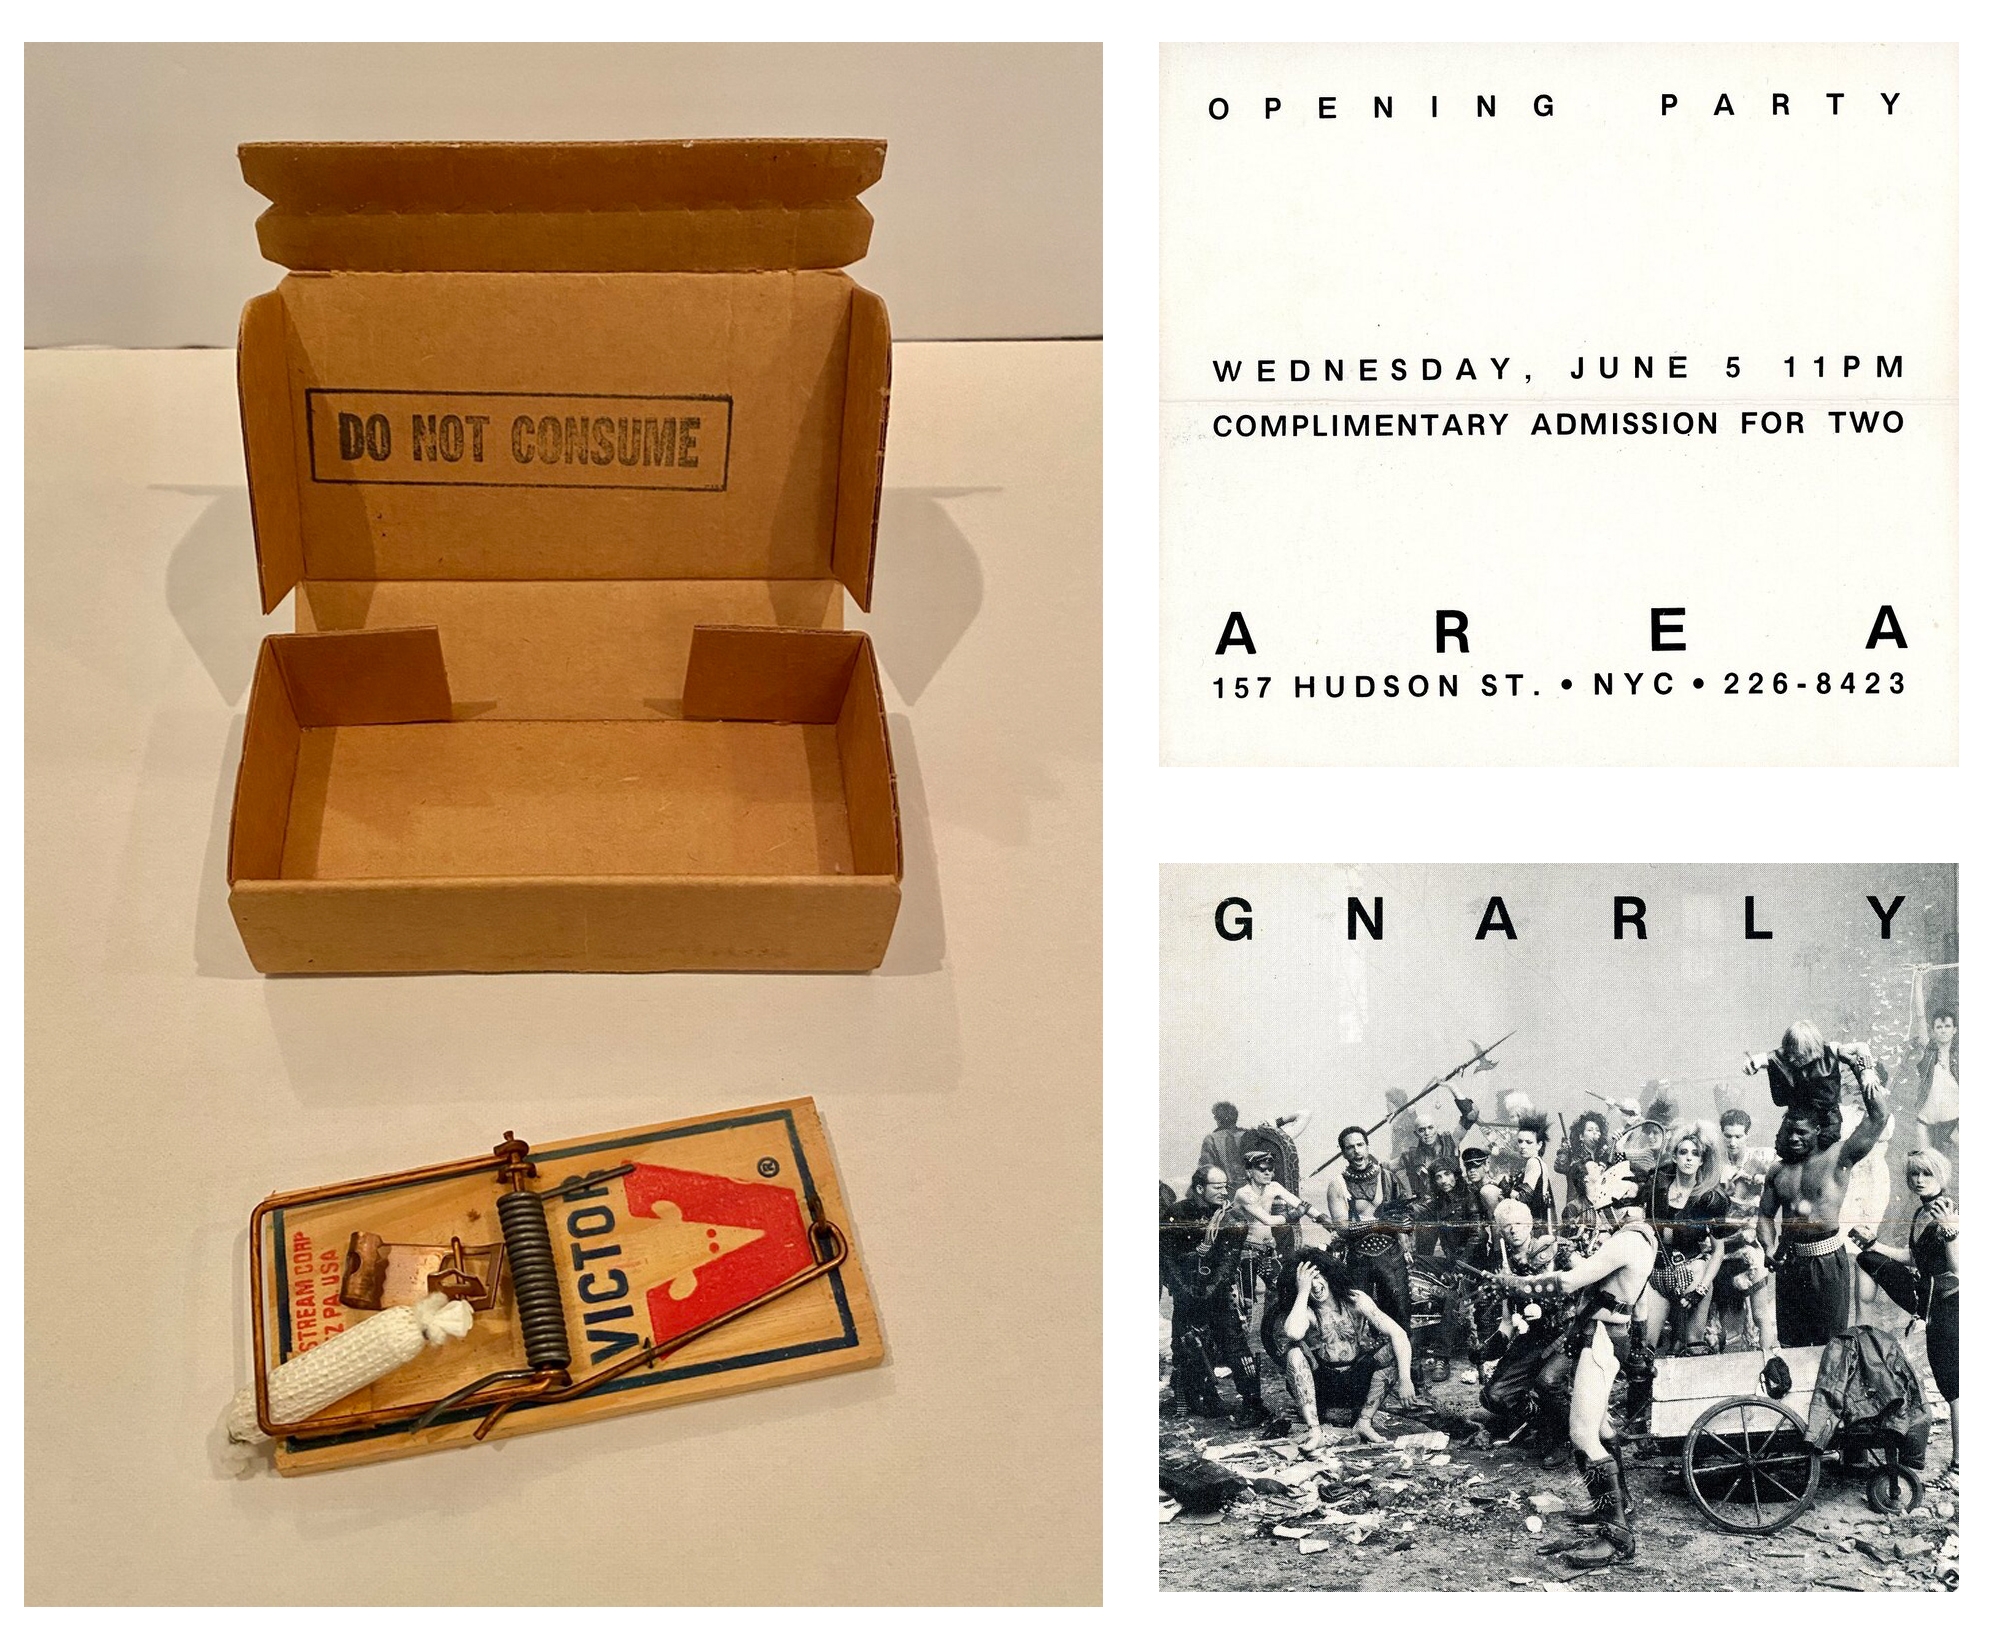 AREA Nightclub, Gnarly- Opening Party, Card with Mousetrap and Box, June 5, 1985